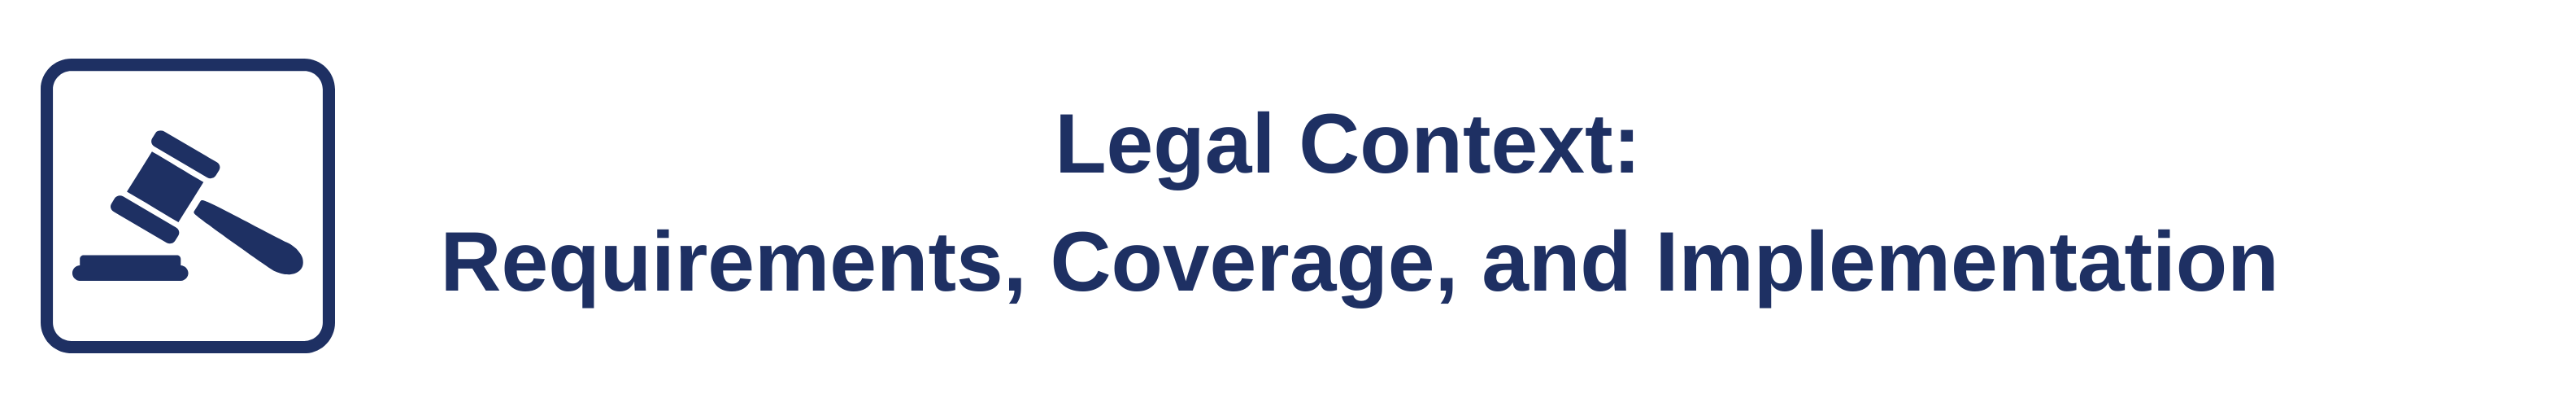 Legal Context: Requirements, Coverage, and Implementation